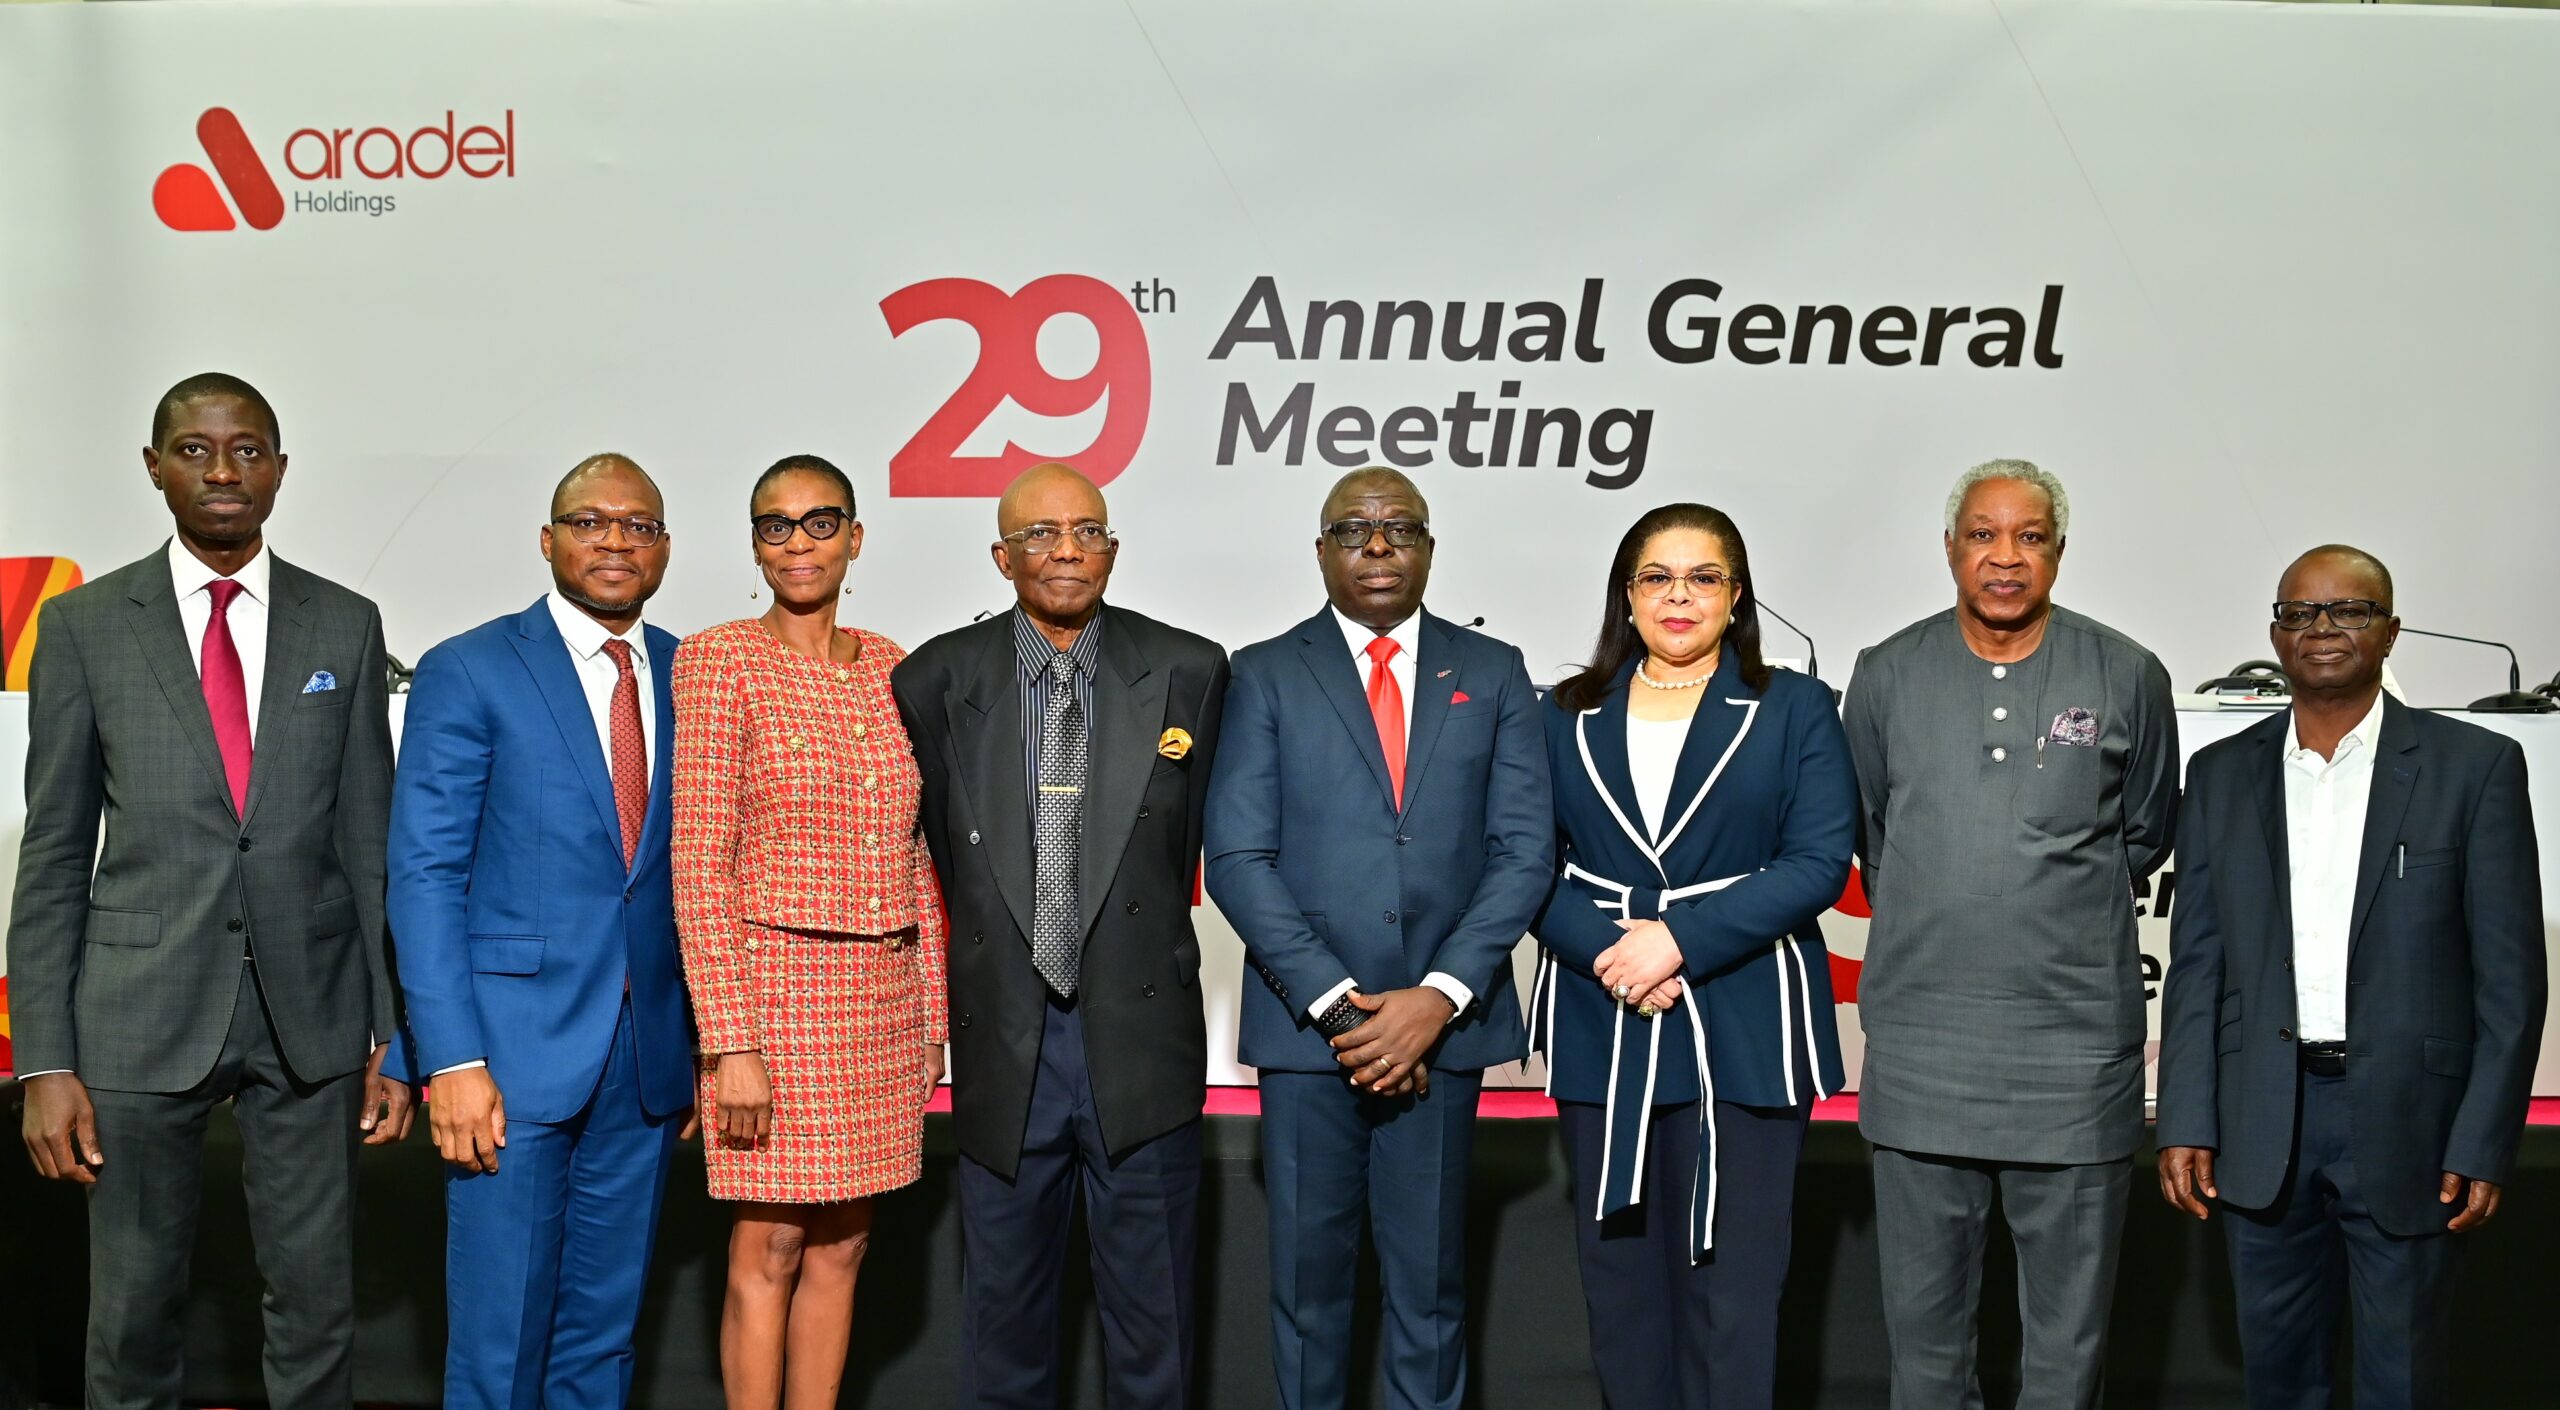 ARADEL HOLDINGS PLC HOLDS 29TH ANNUAL GENERAL MEETING